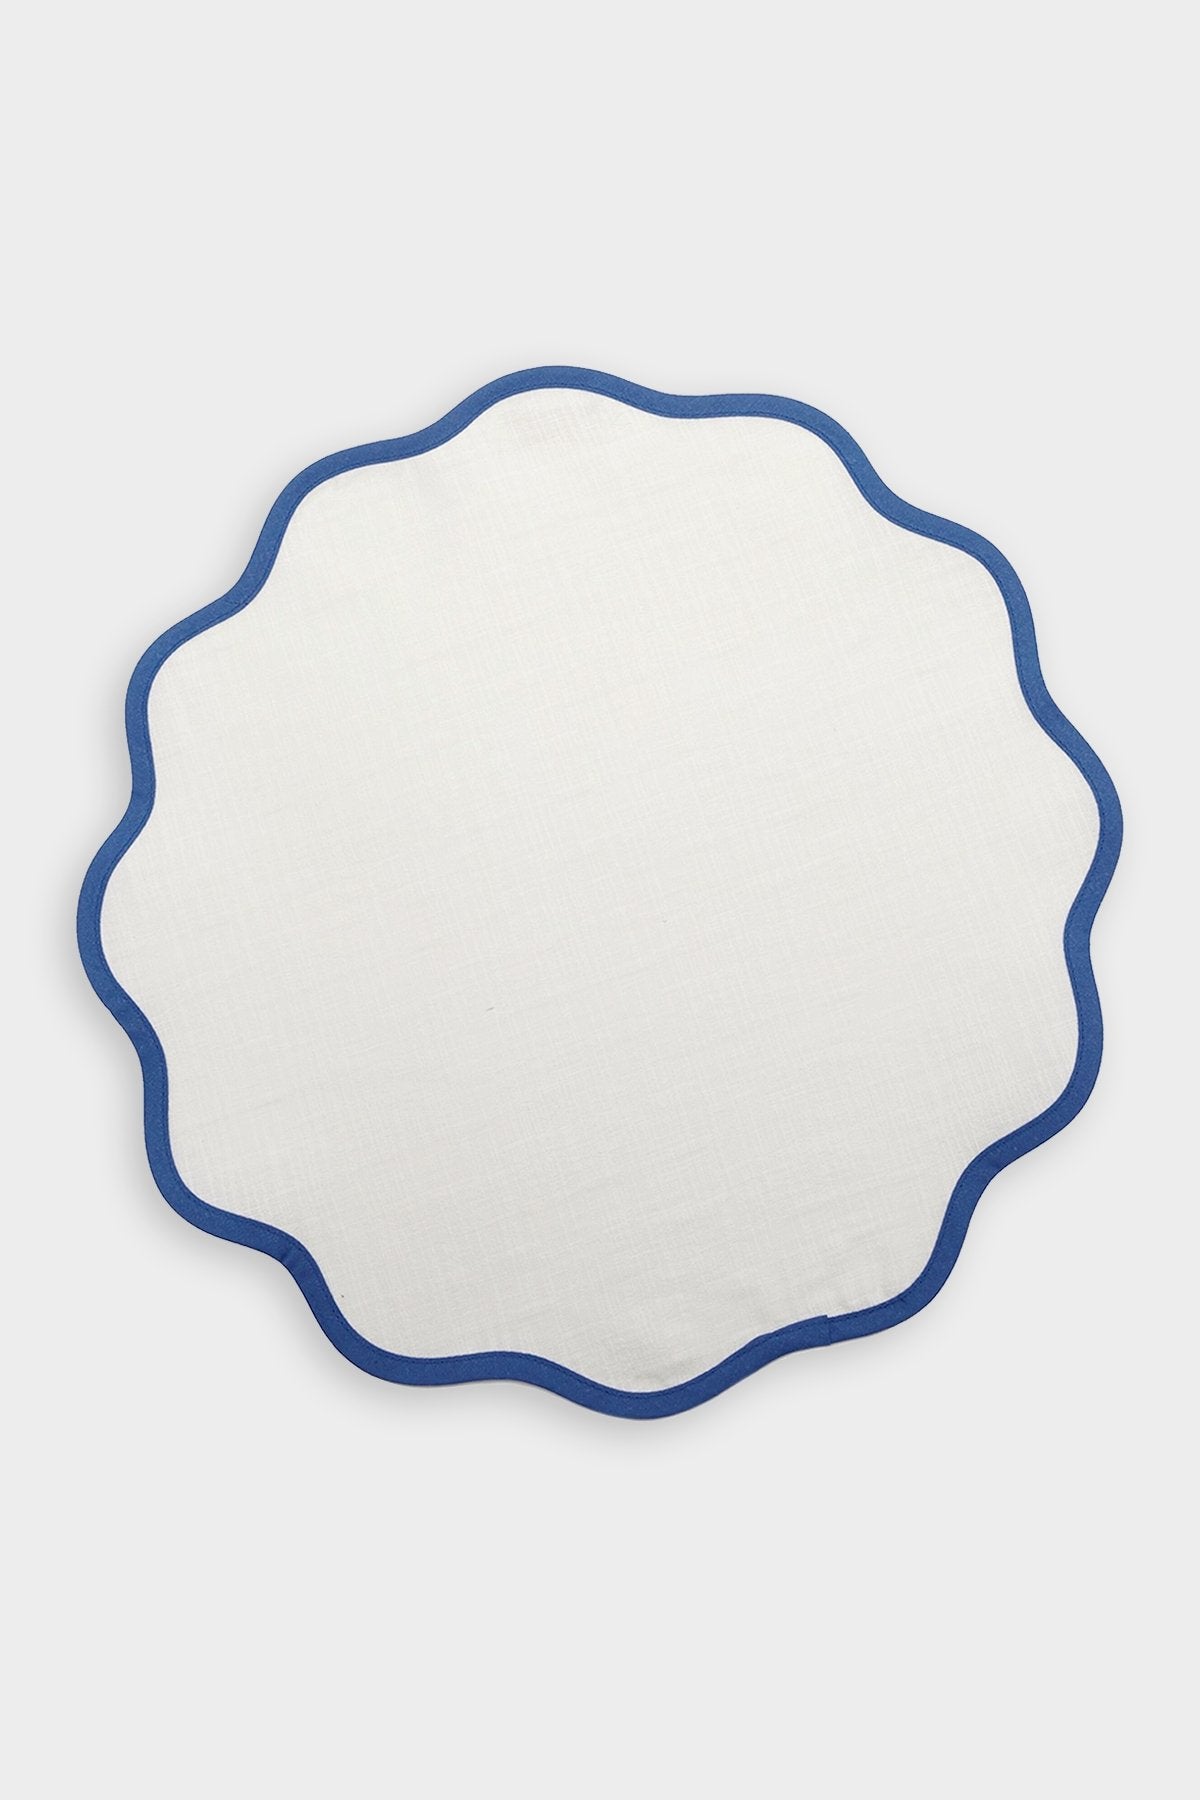 Scalloped Tablemats in White - shop-olivia.com